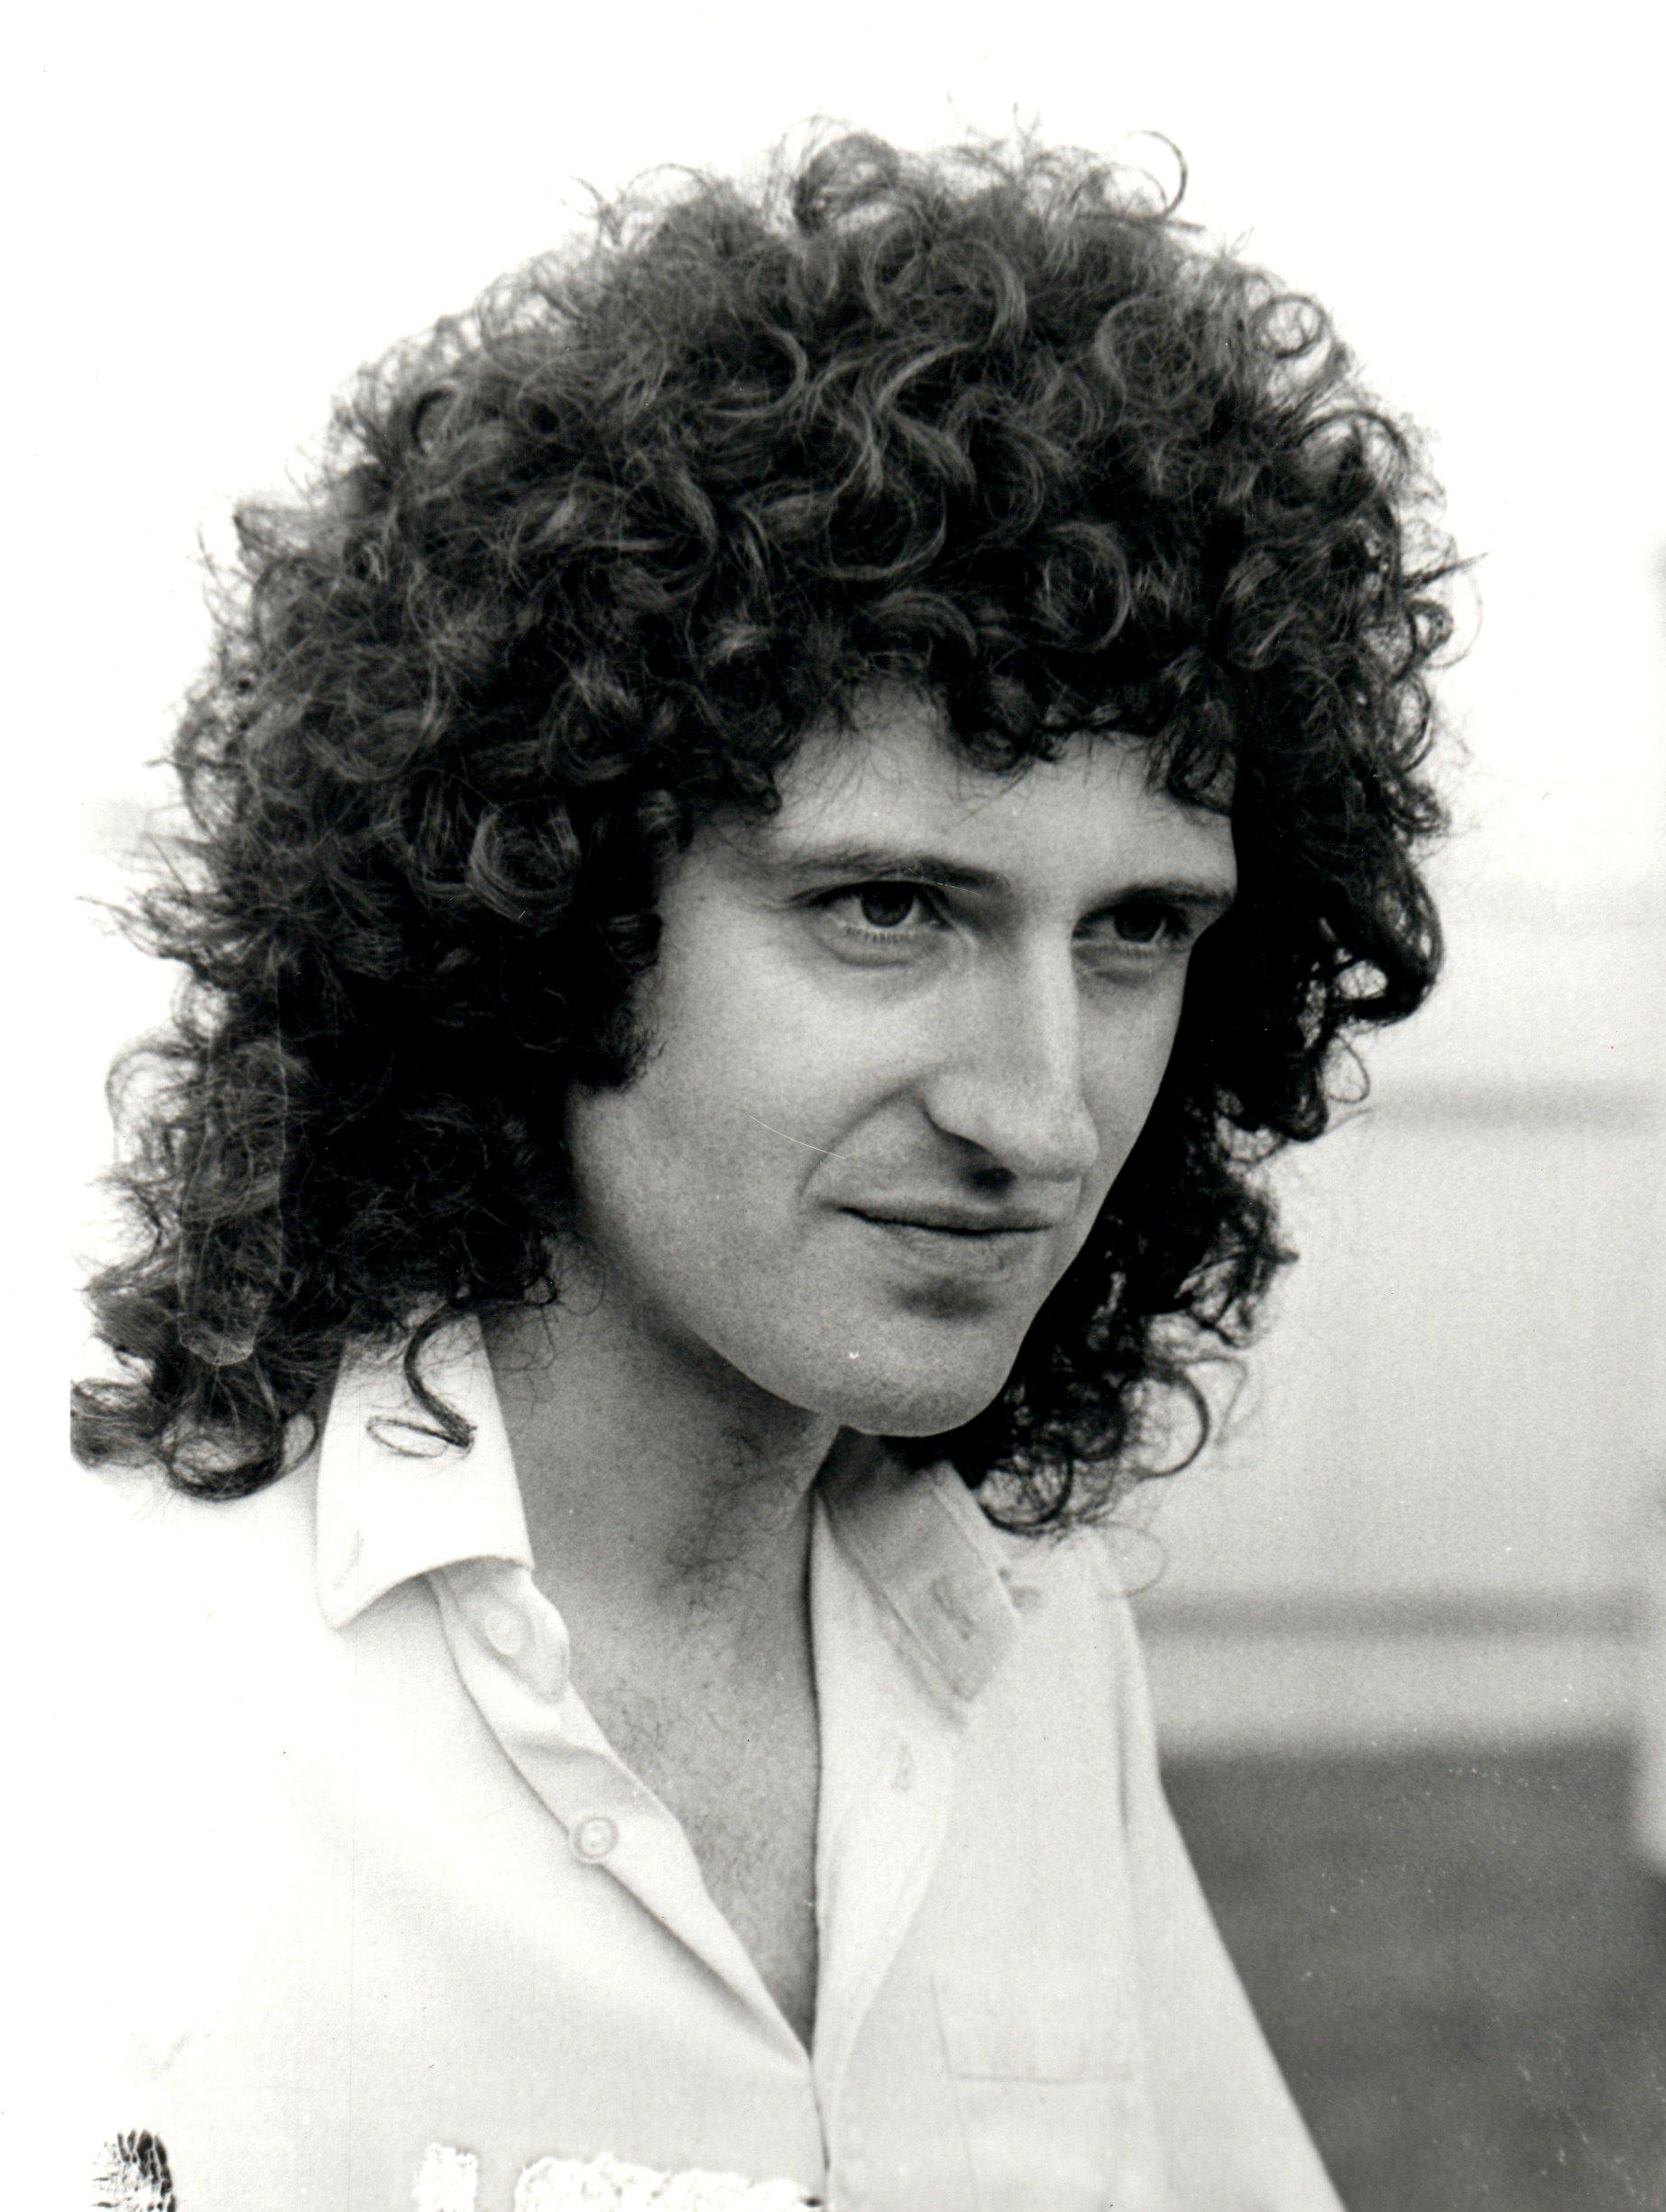 Chris Walter Black and White Photograph - Brian May of Queen Candid and Smiling Vintage Original Photograph